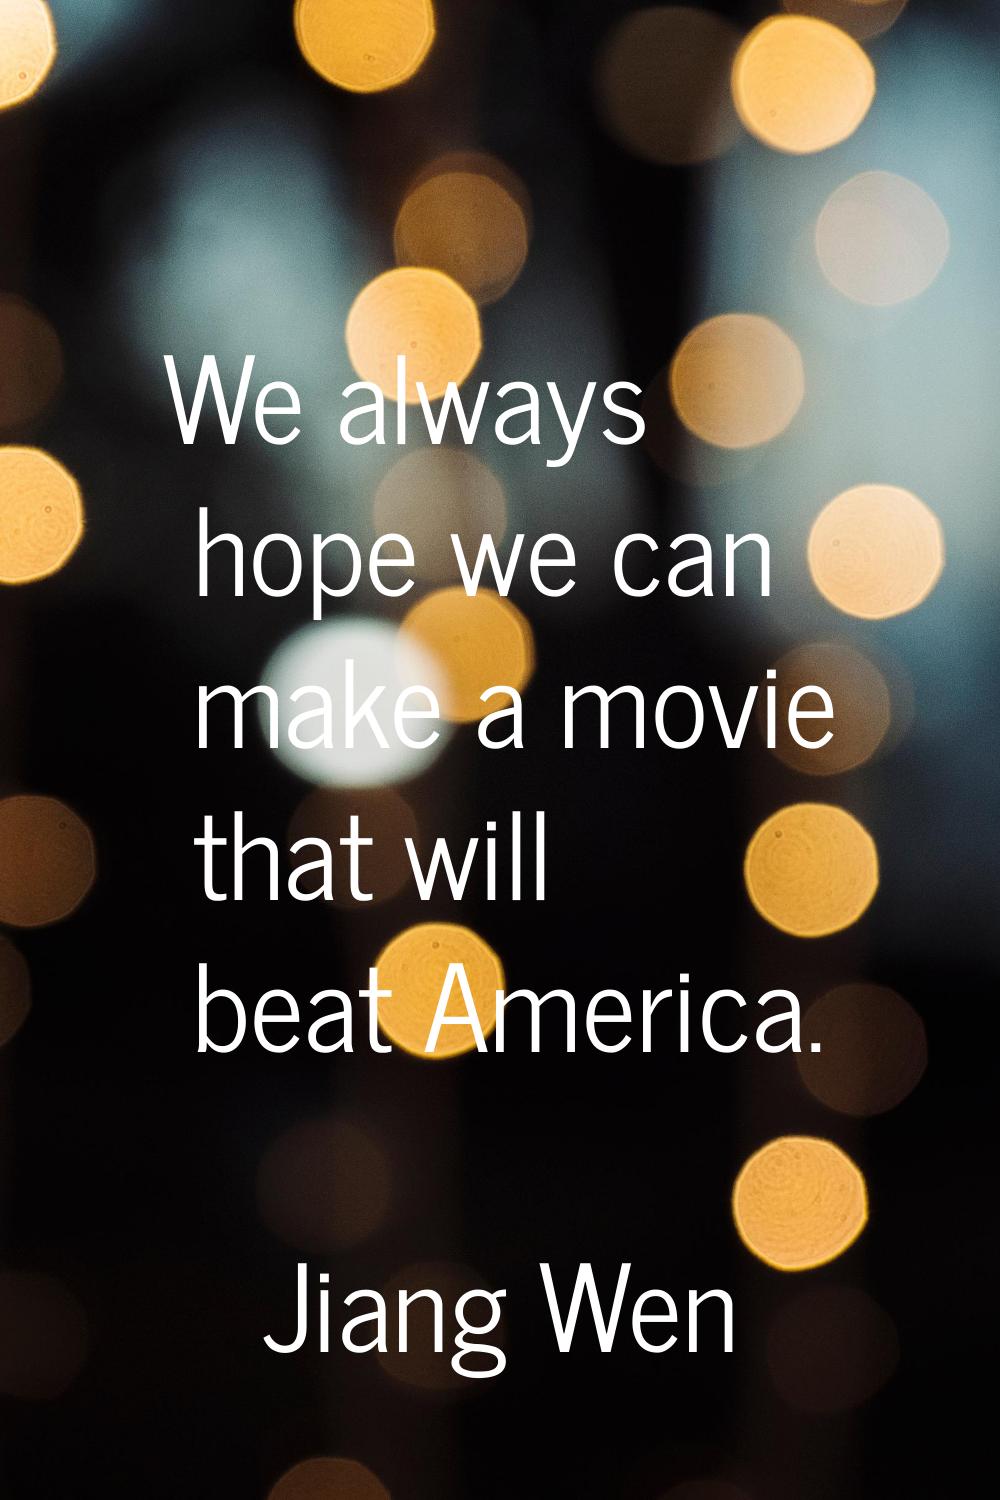 We always hope we can make a movie that will beat America.